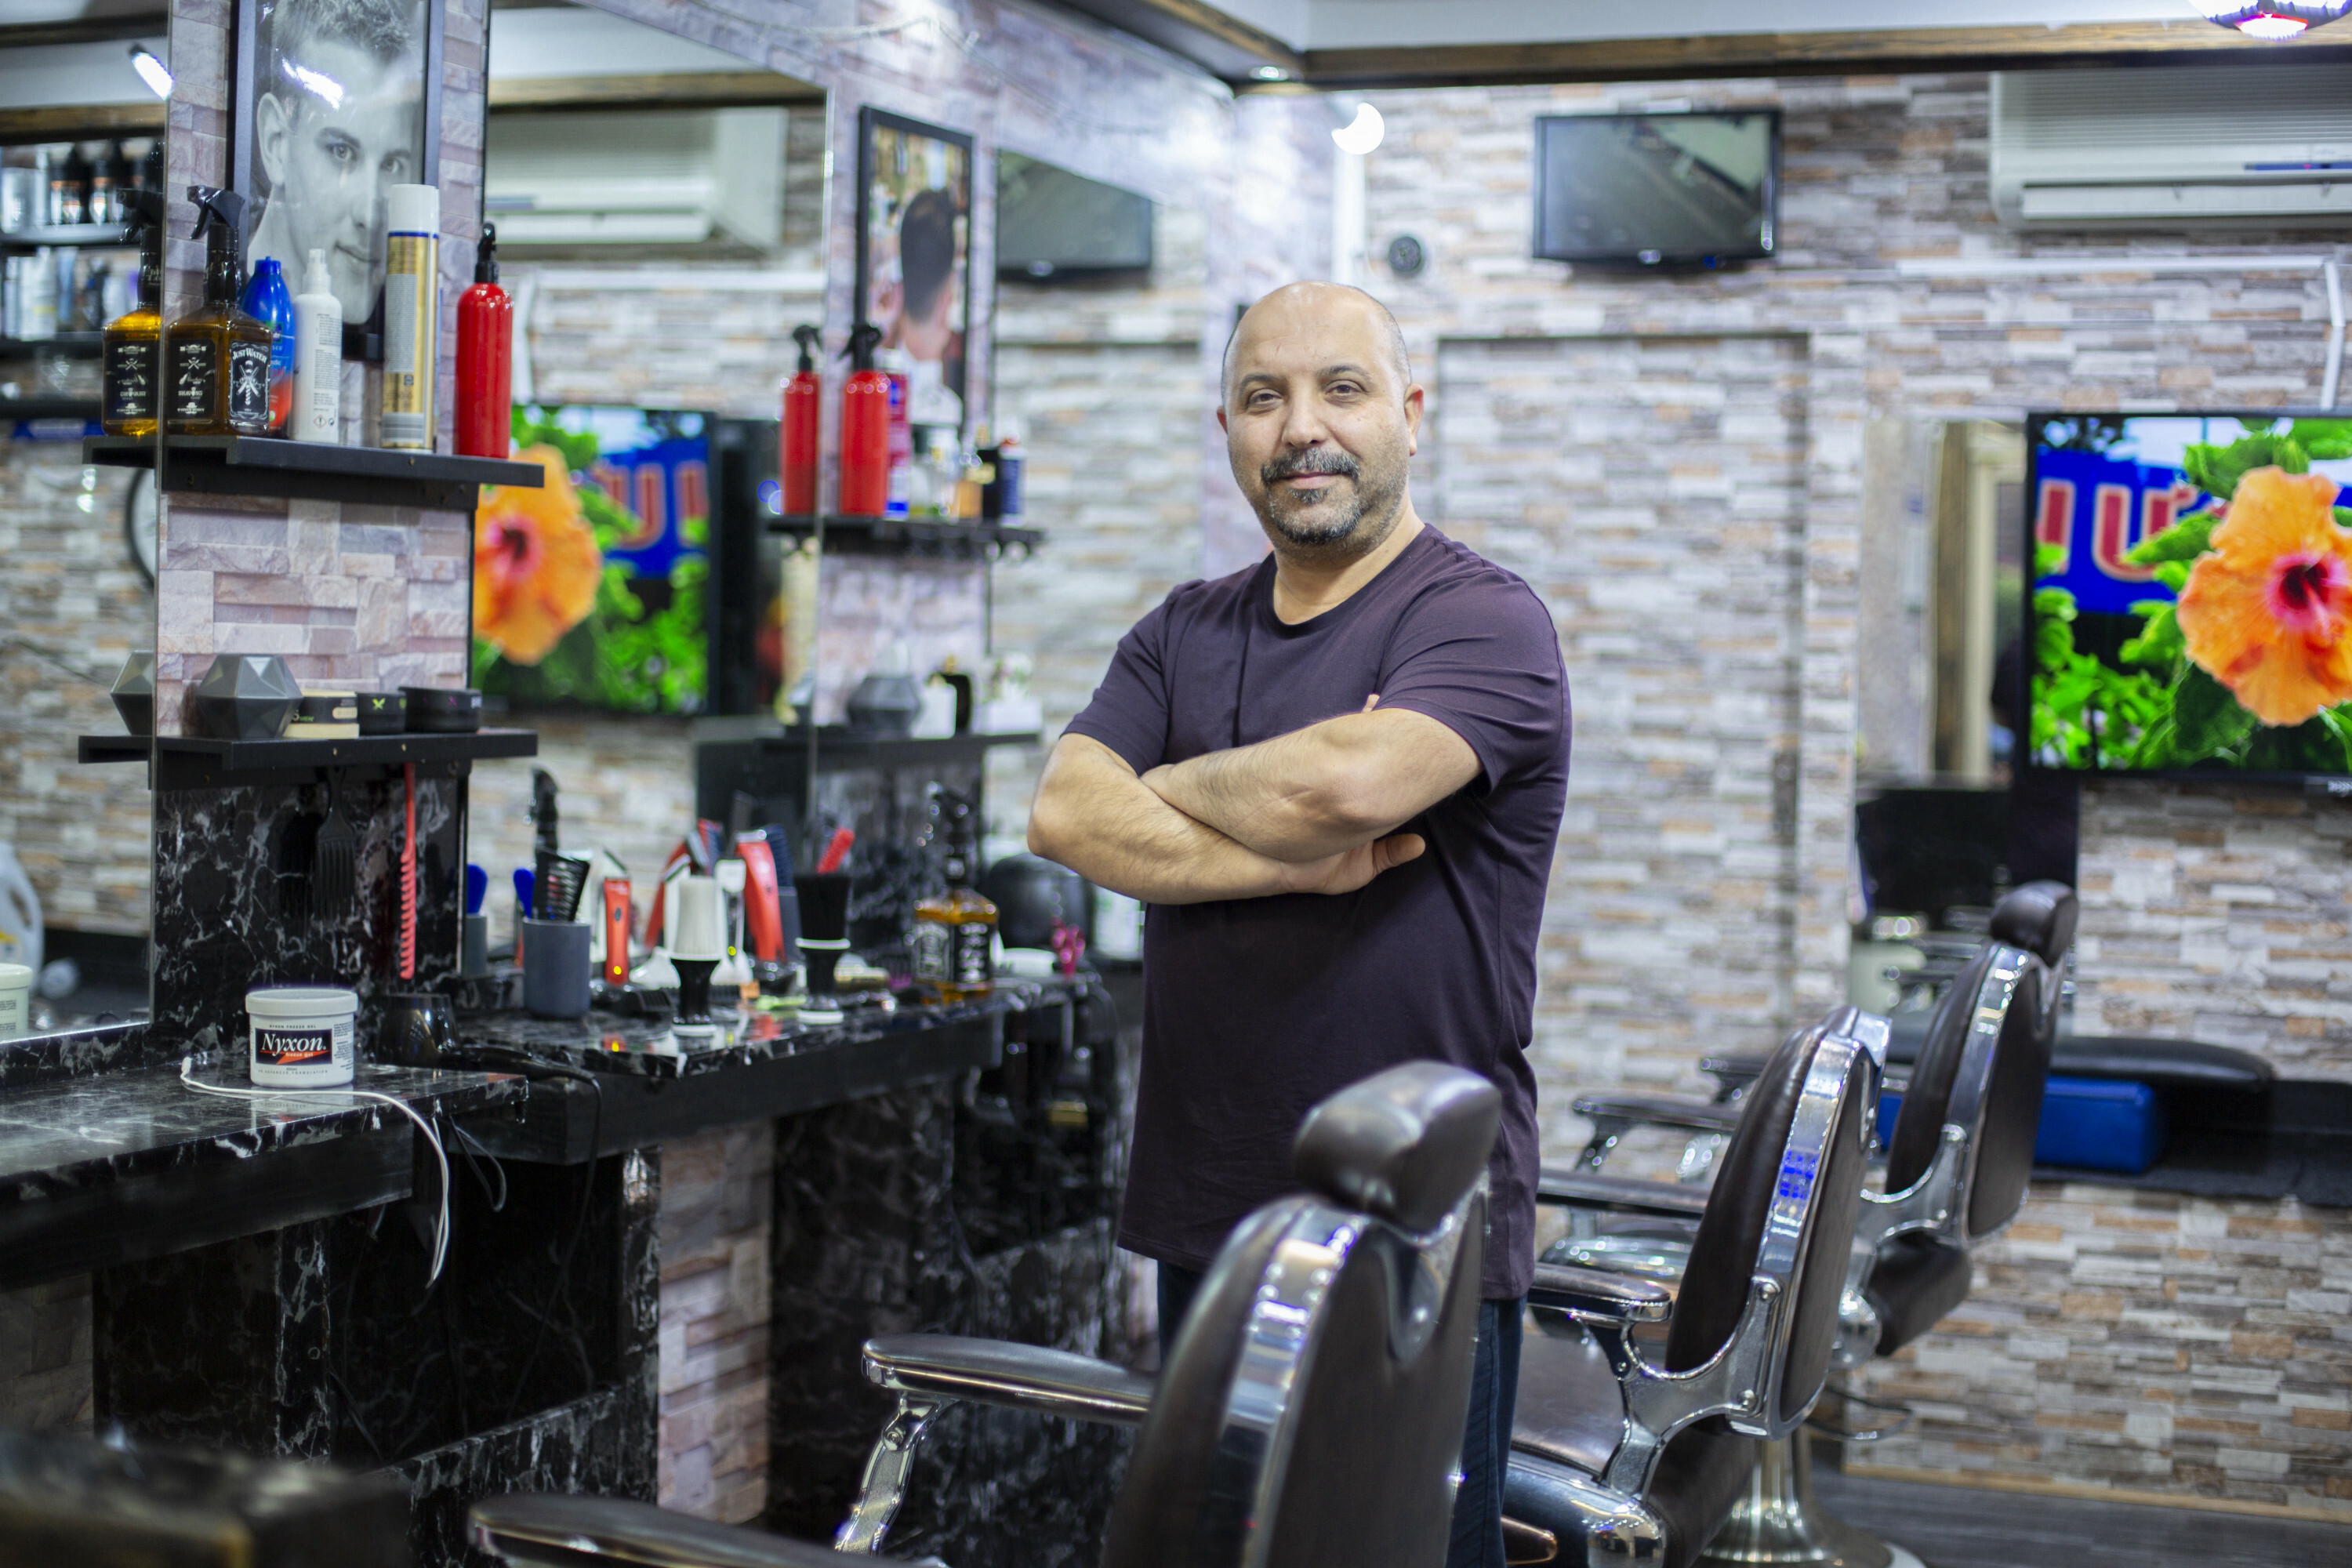 Portraits of migrant shopkeepers living in London